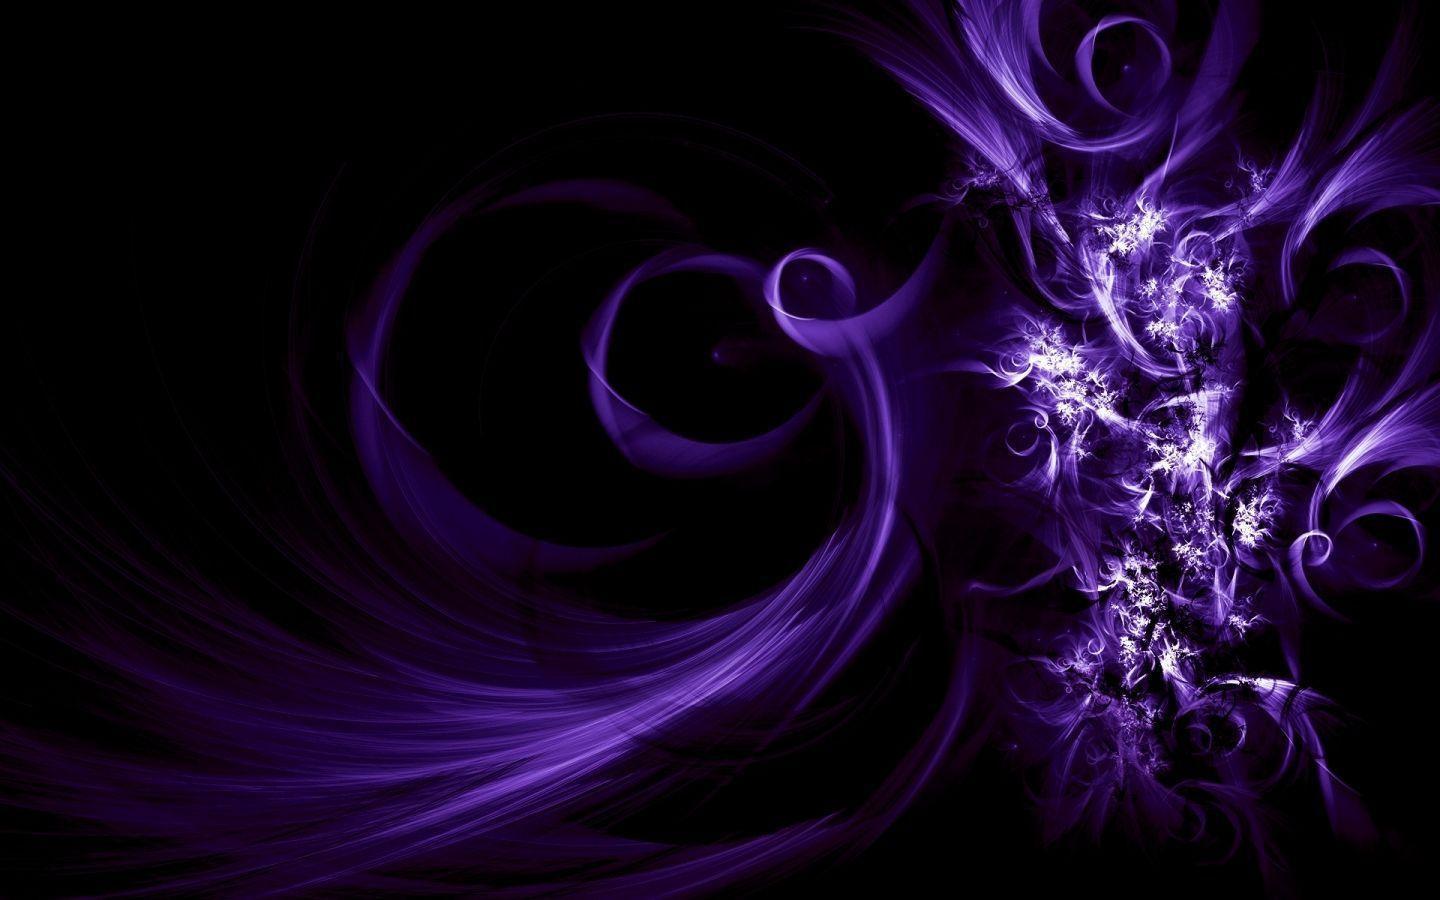 Gallery For > Black And Purple Background Patterns